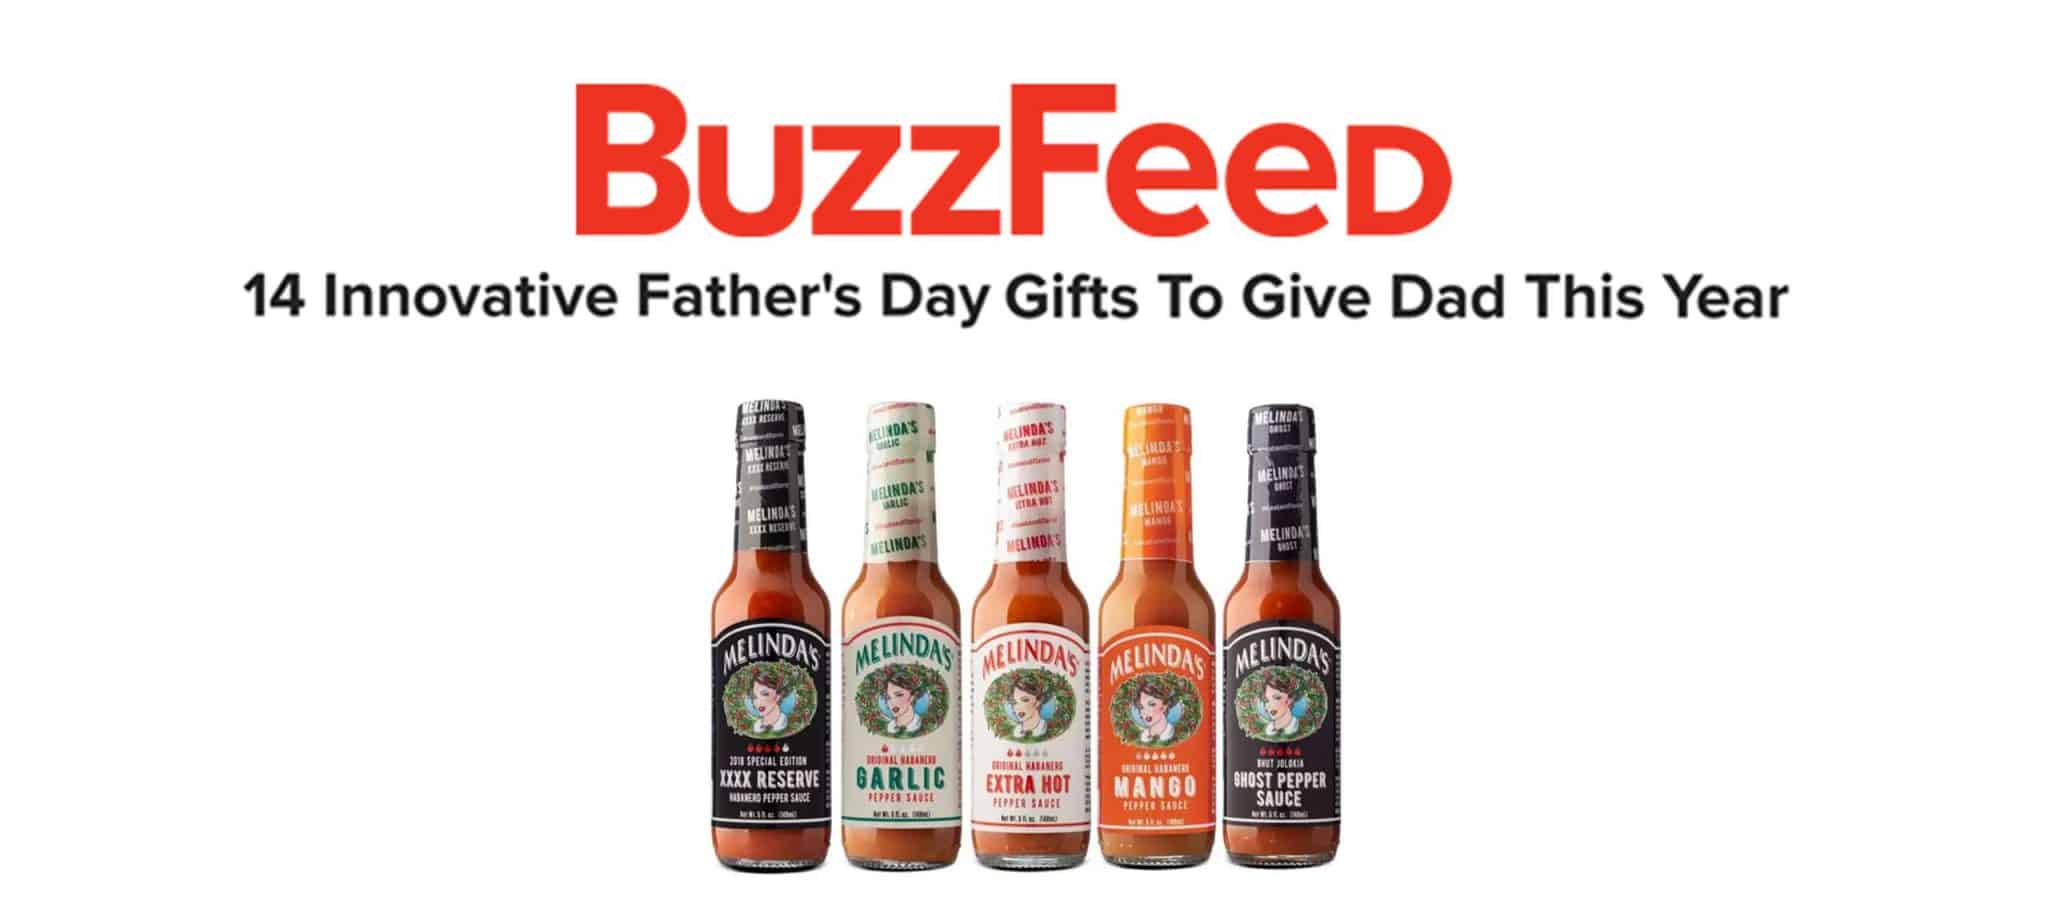 14 Innovative Father's Day Gifts To Give Dad This Year | BuzzFeed